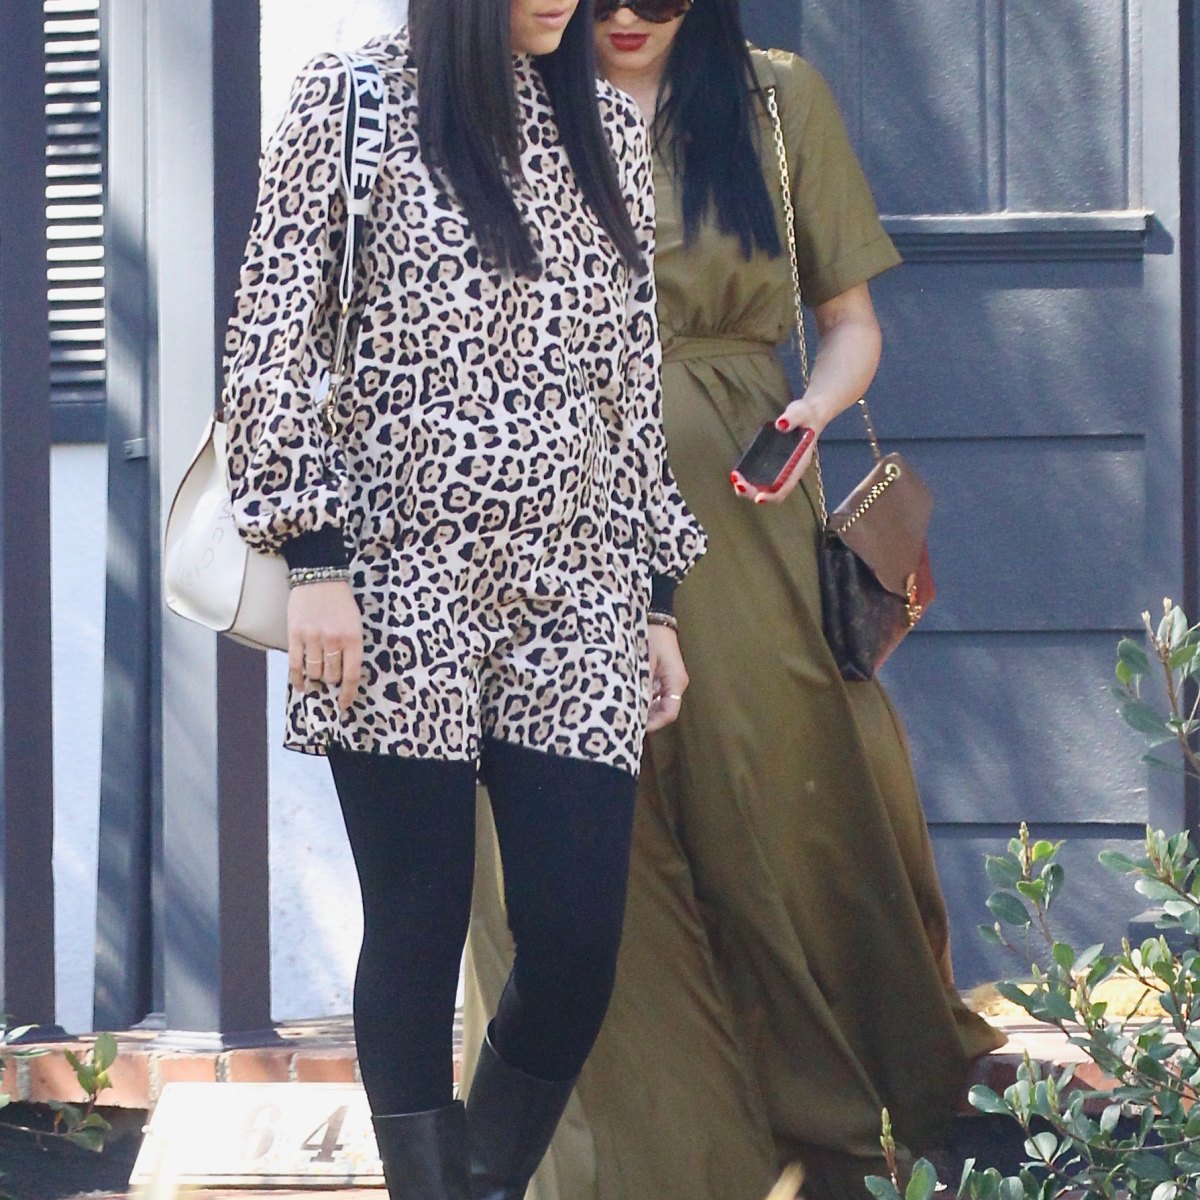 Brie Bella shows off her pregnancy glow in neon as she steps out with  sister Nikki for lunch in LA